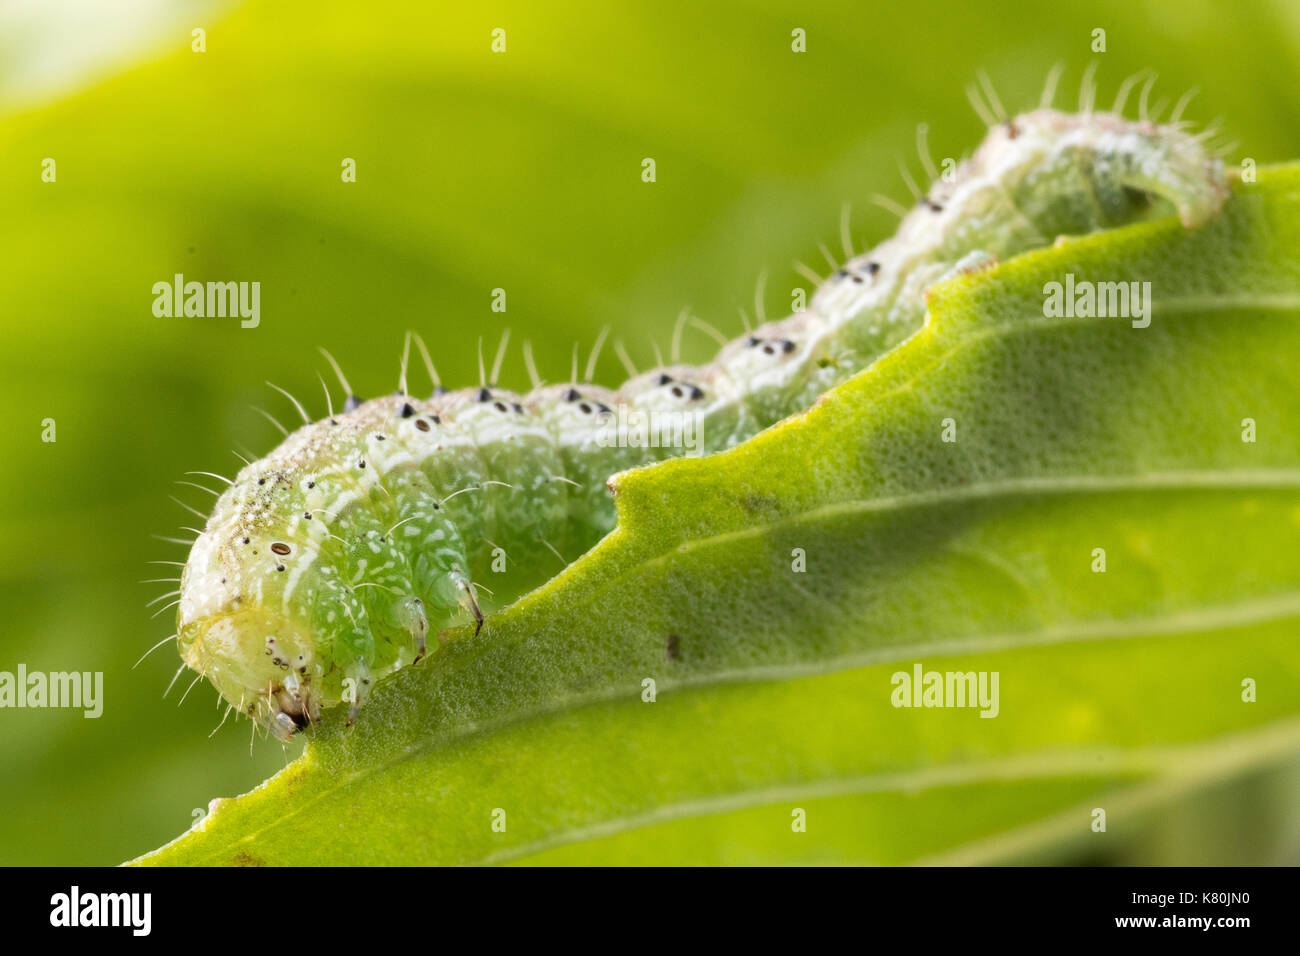 Cross-striped cabbage looper is crawling on  sweet basil leaf. Stock Photo